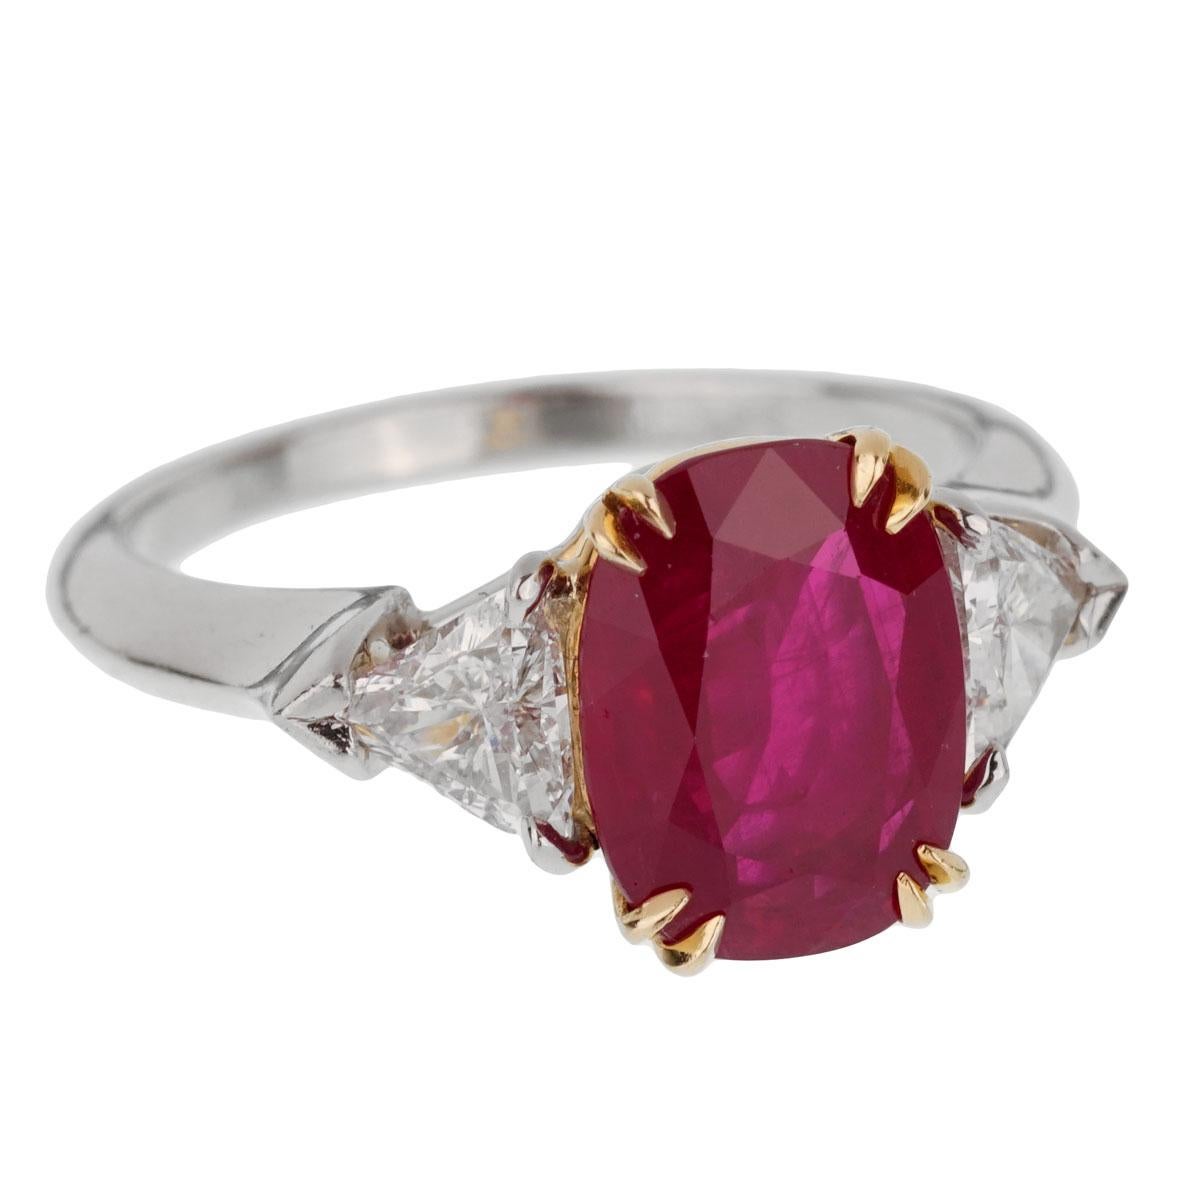 An iconic Harry Winston ring showcasing a 3.02ct Burma ruby set in 18k yellow gold flanked by 2 trillion cut diamonds in platinum. The ring measures a size 5 1/2 and can be resized.